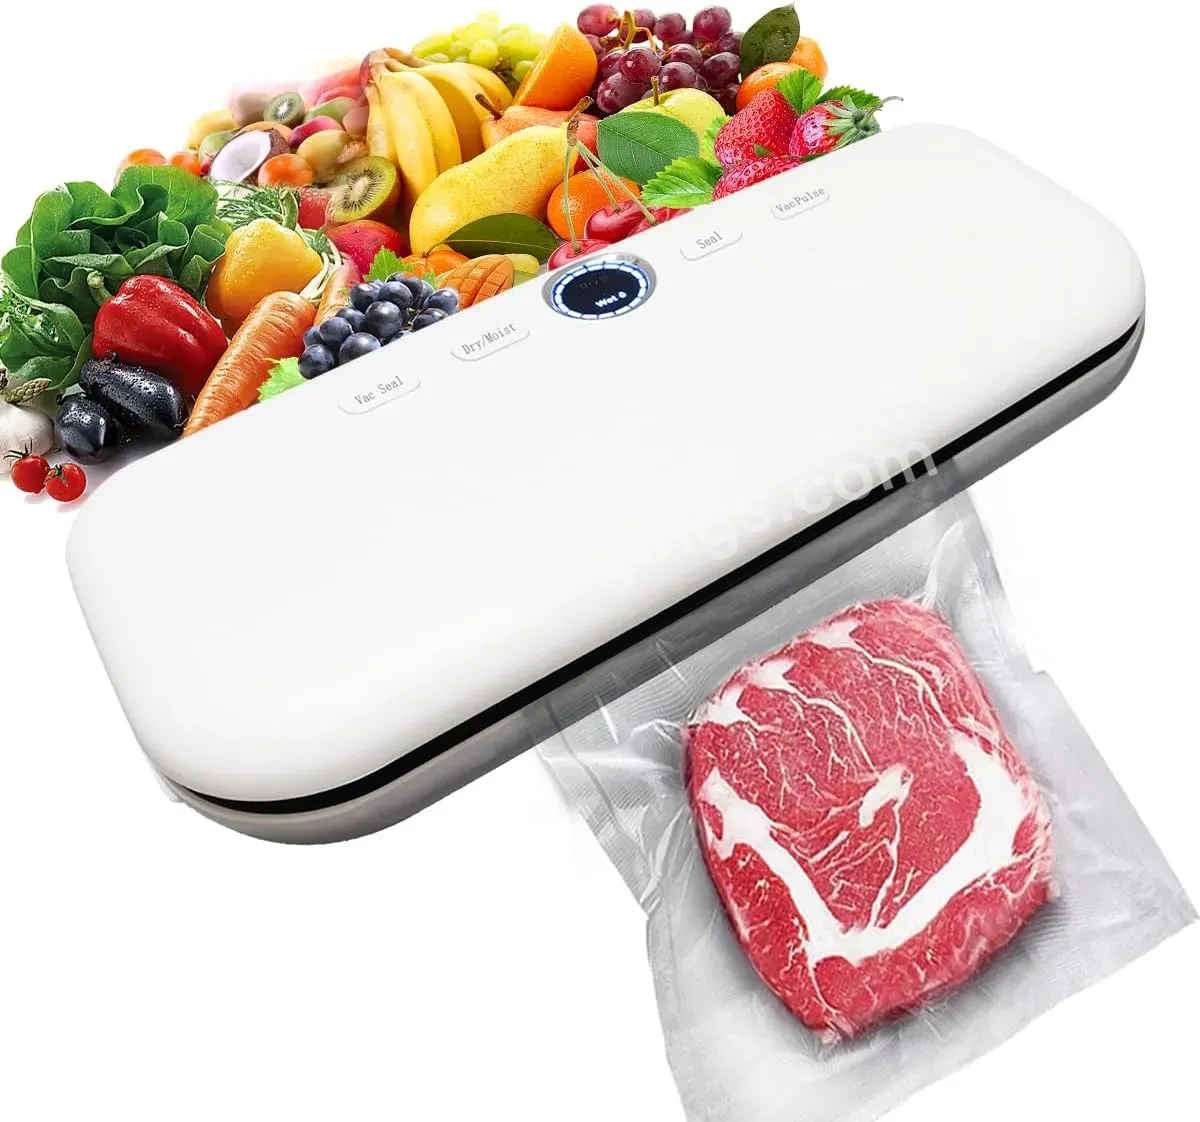 White Household Small Food Saver Led Display Vacuum Sealer Machine For Dry Moist Oily And Soft Food Storage - Buy Led Display Vacuum Sealer Machine,Household Small Sealing System For Food Storage,Vacuum Sealer.